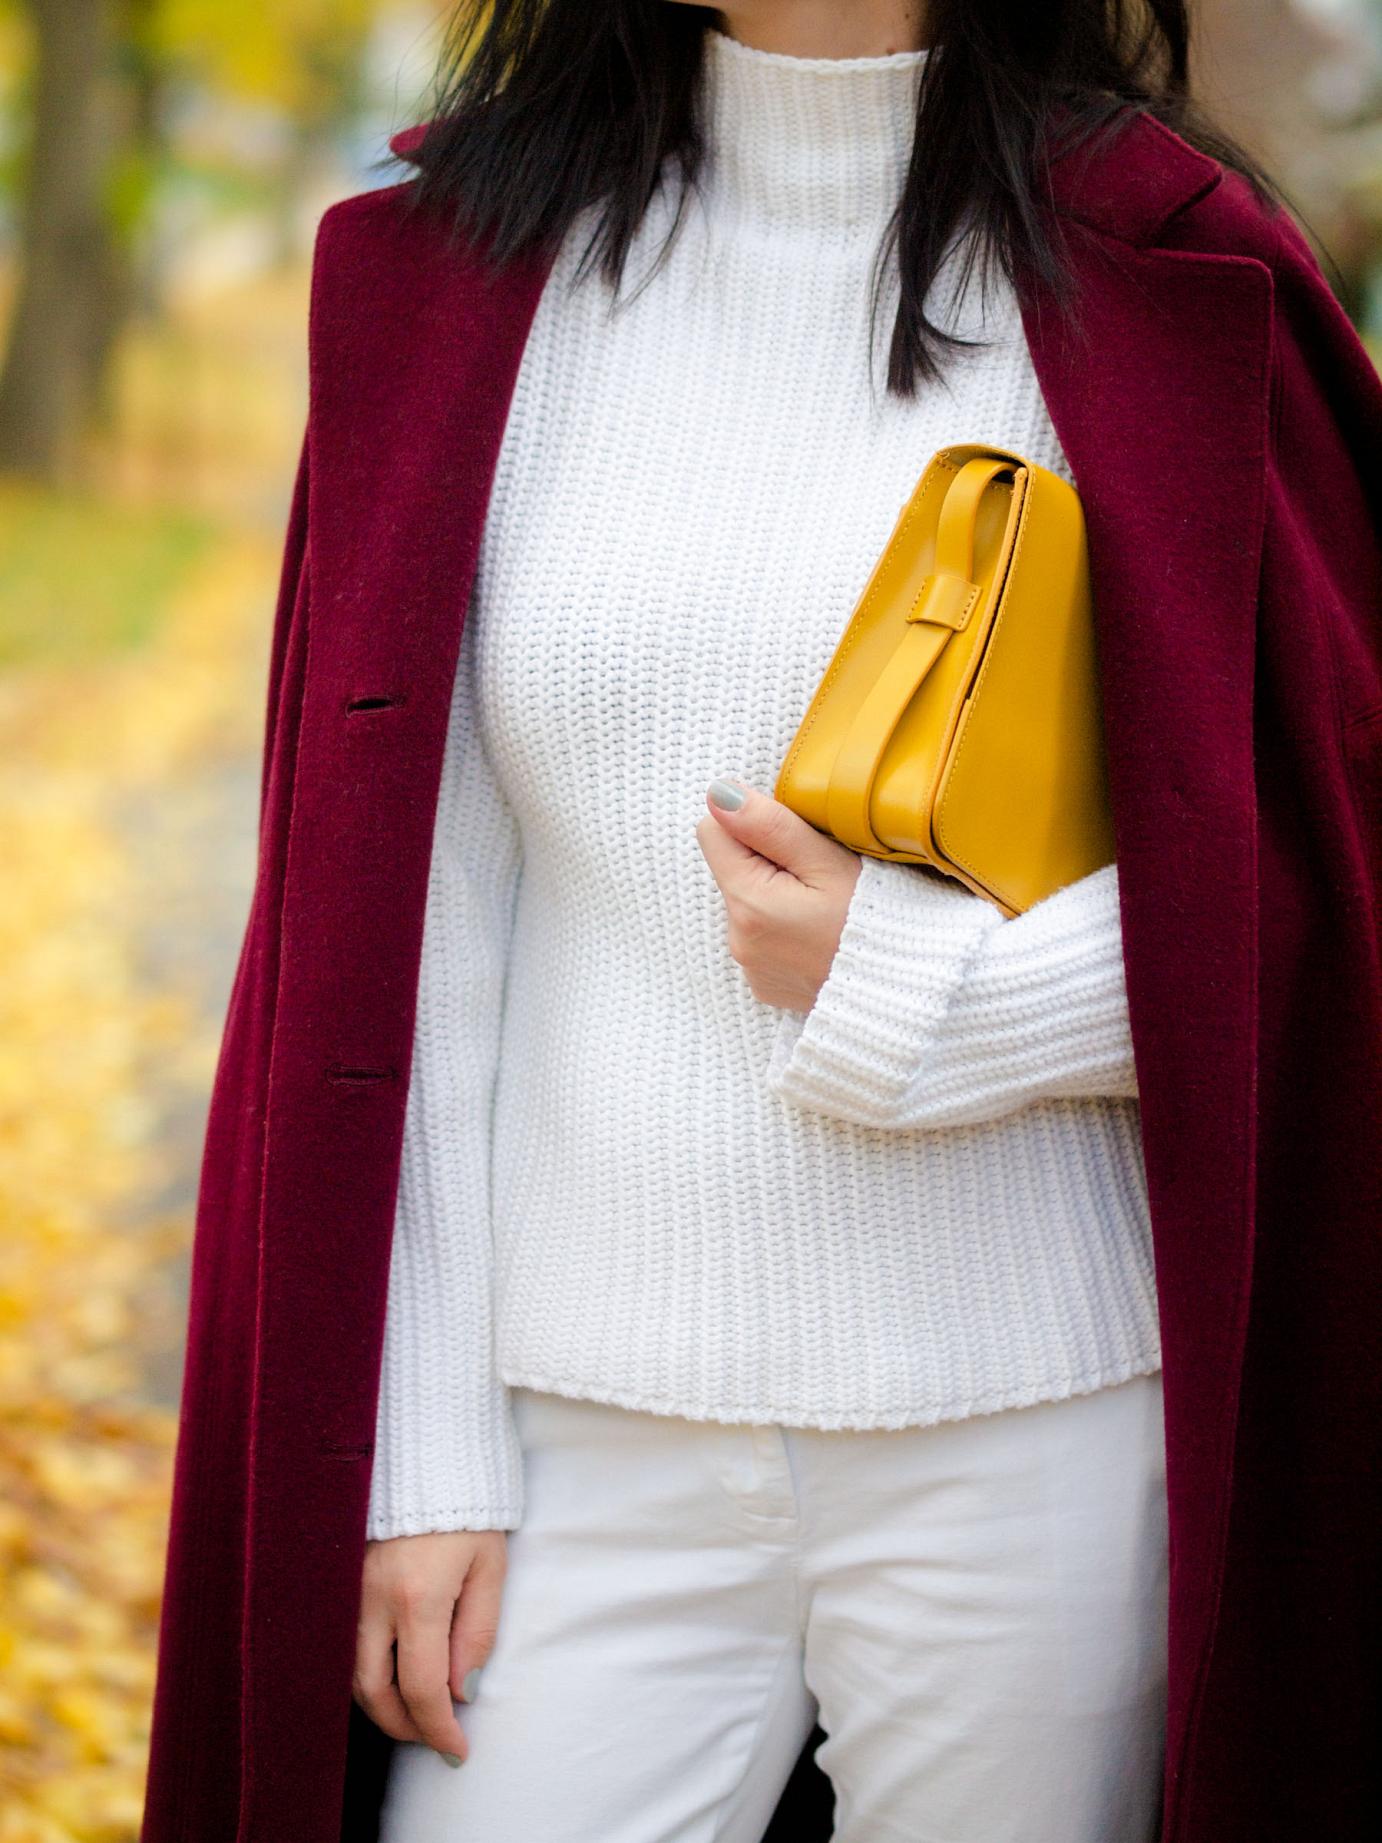 bittersweet colours, fall colors, fall coats, fall trends, burgundy coat, burgundy trend, street style, maternity style, 18 weeks, white on white trend, Tommy Hilfiger, adidas, stan smith adidas, white sneakers, sneakers trend, red lips